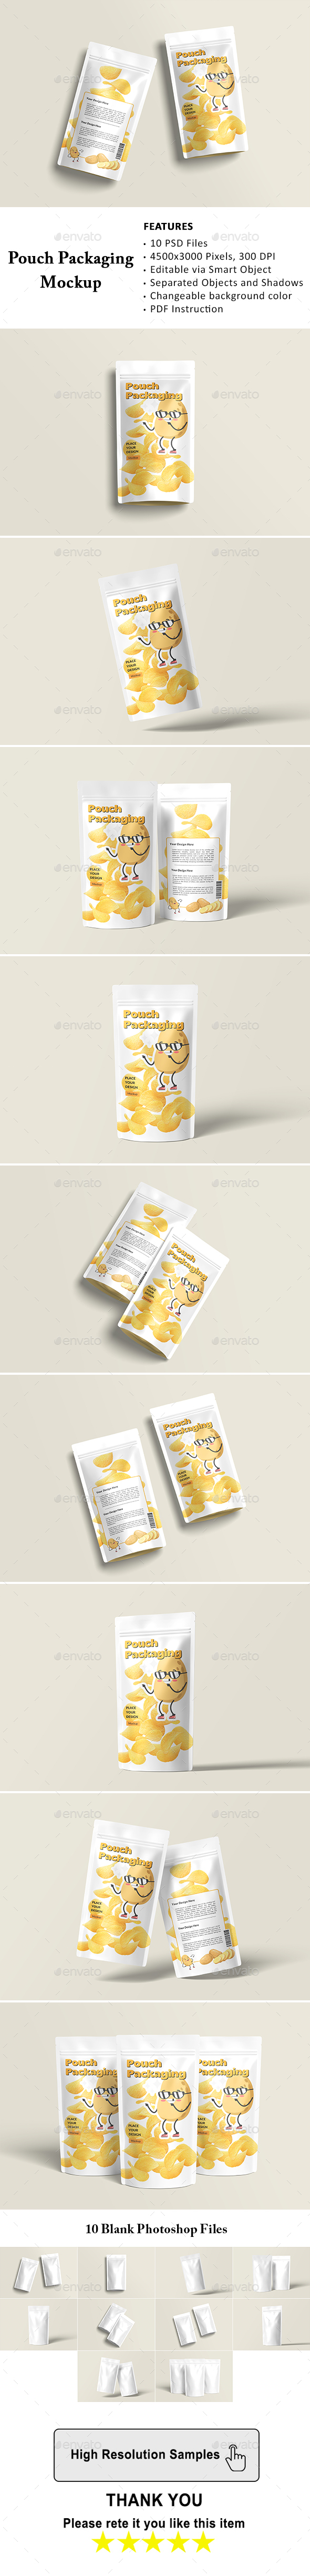 [DOWNLOAD]Pouch Packaging Mockup